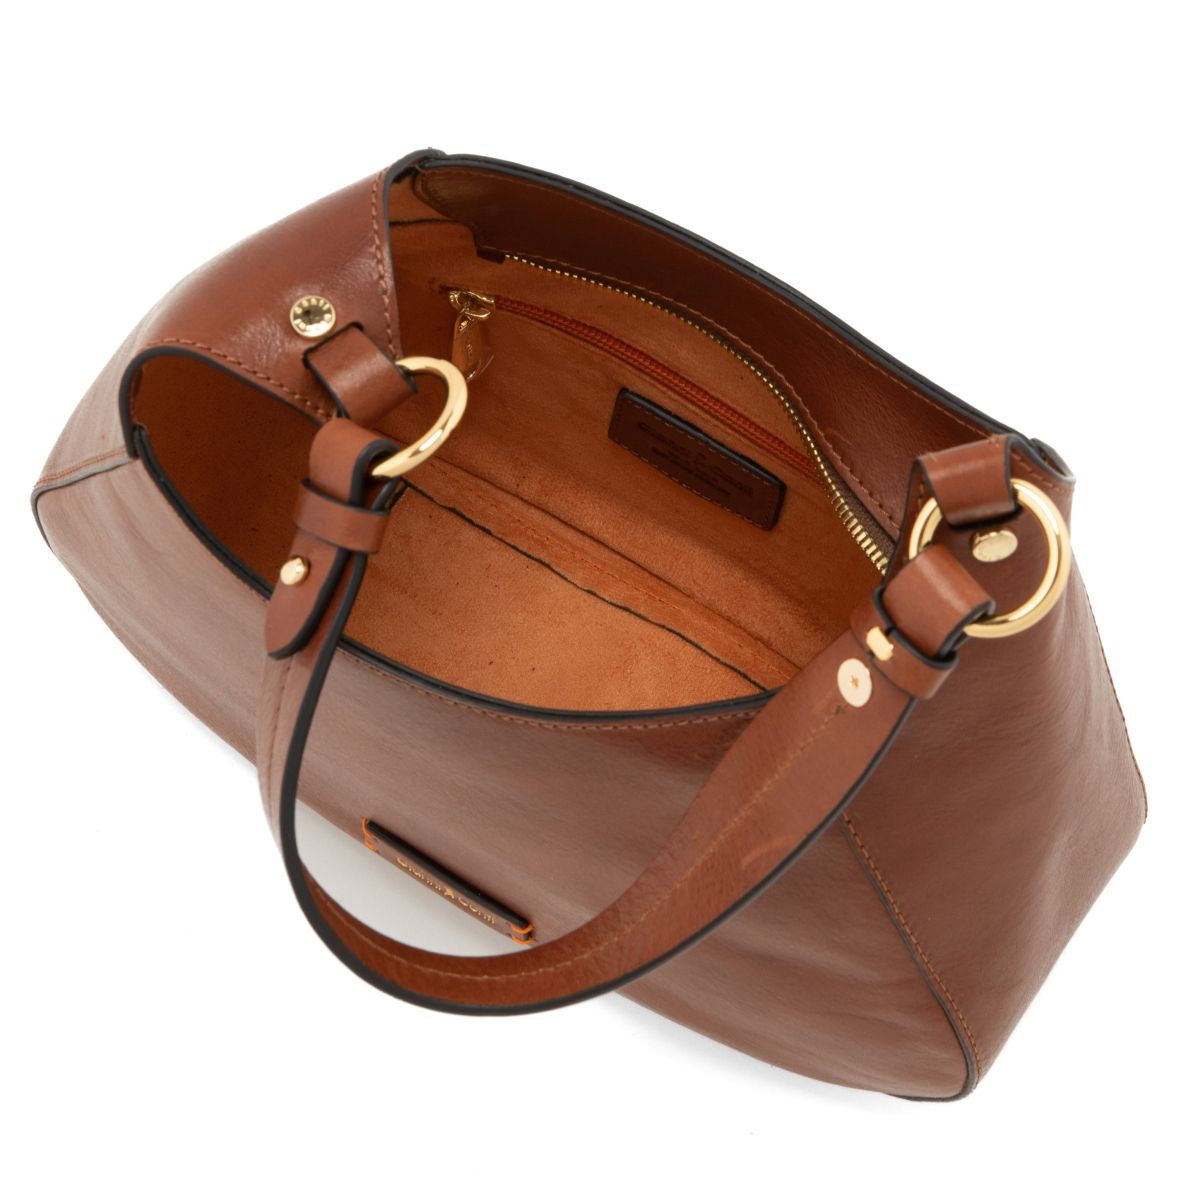 Gianni Conti MABEL Vegetable-Tanned Leather Shoulder Bag